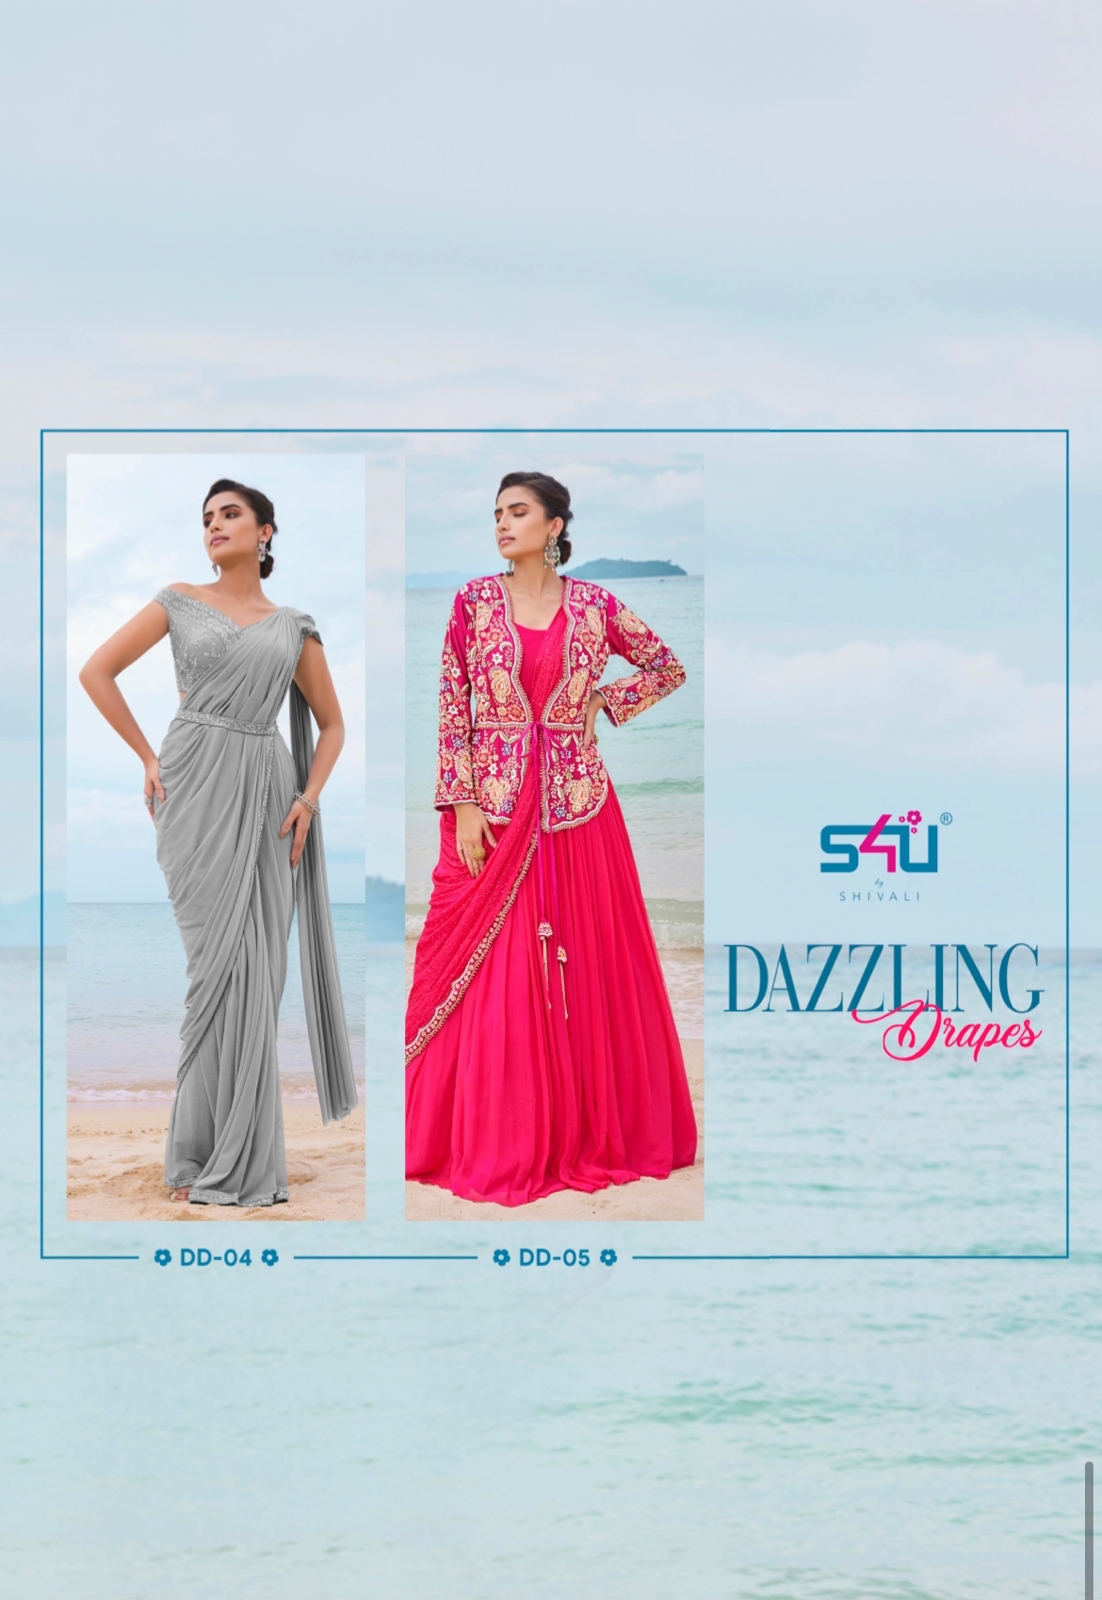 S4U Dazzling Drapes collection 1